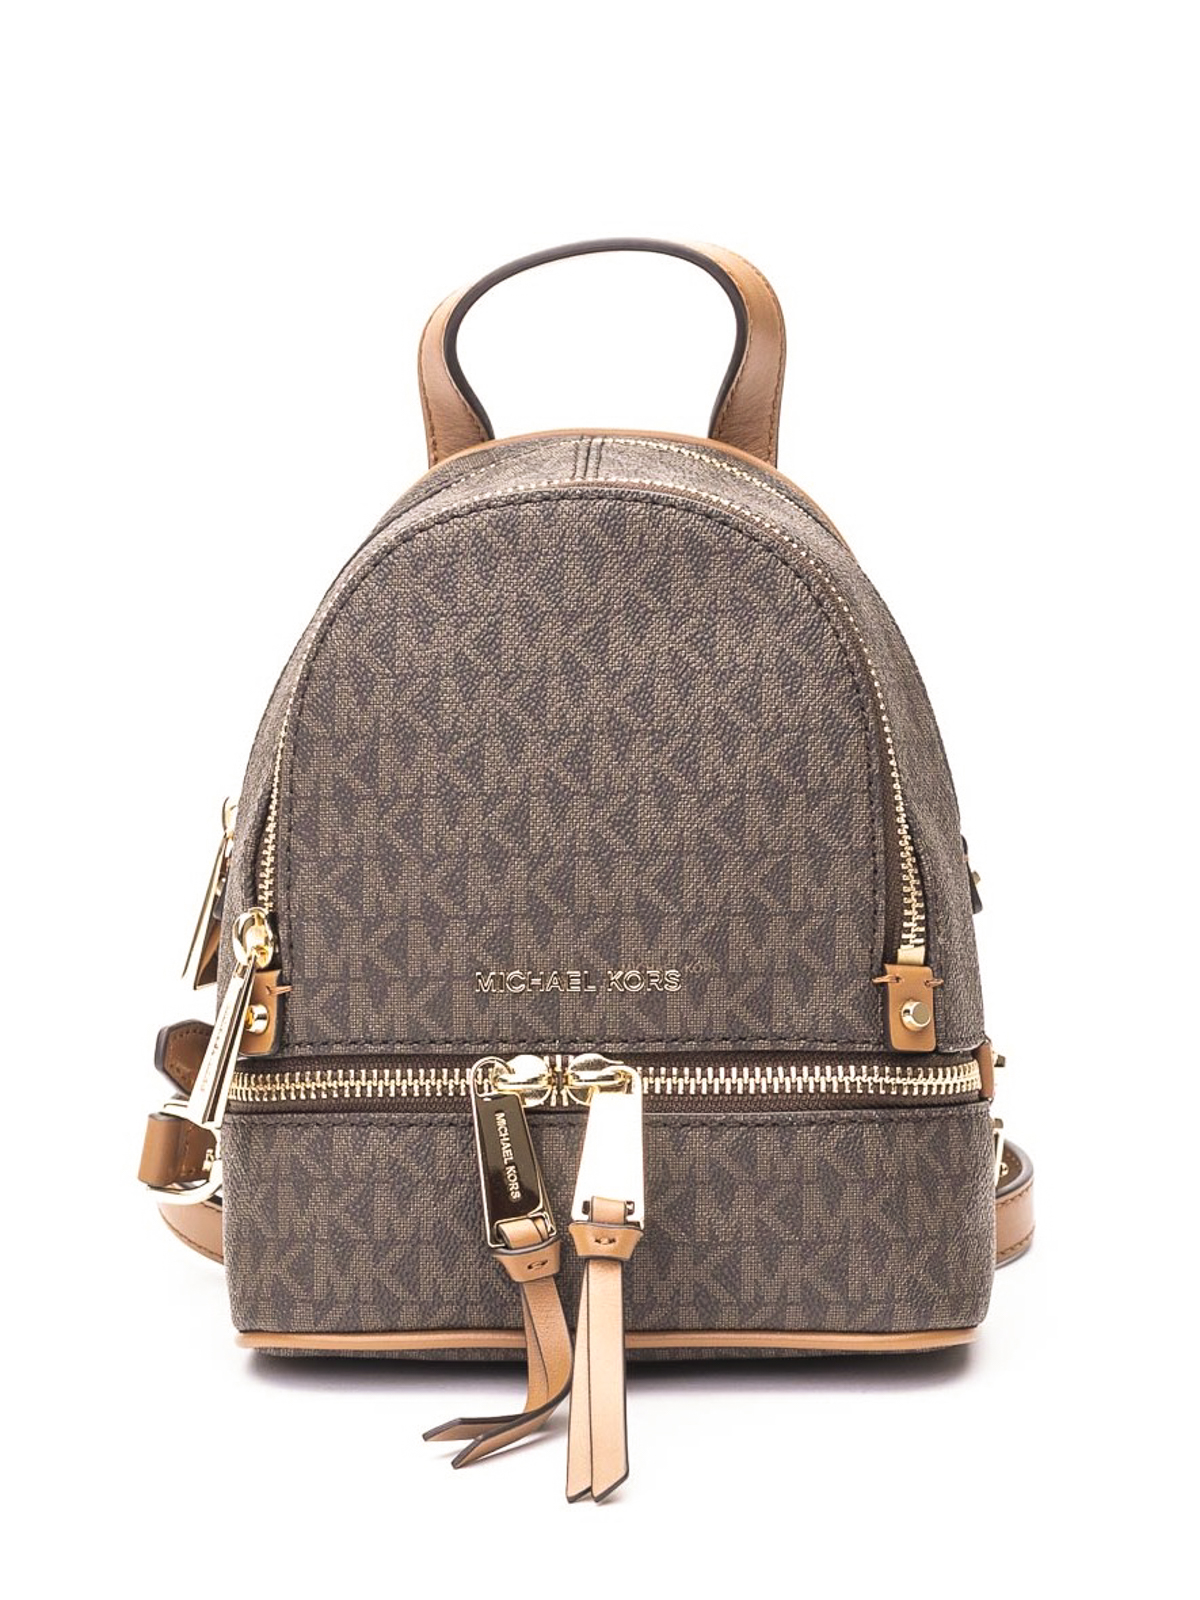 Michael Kors Adina Medium Double Zip Backpack in Brown Signature Logo Print  Coated Canvas and Leather Details  Womens Backpack  Lazada PH